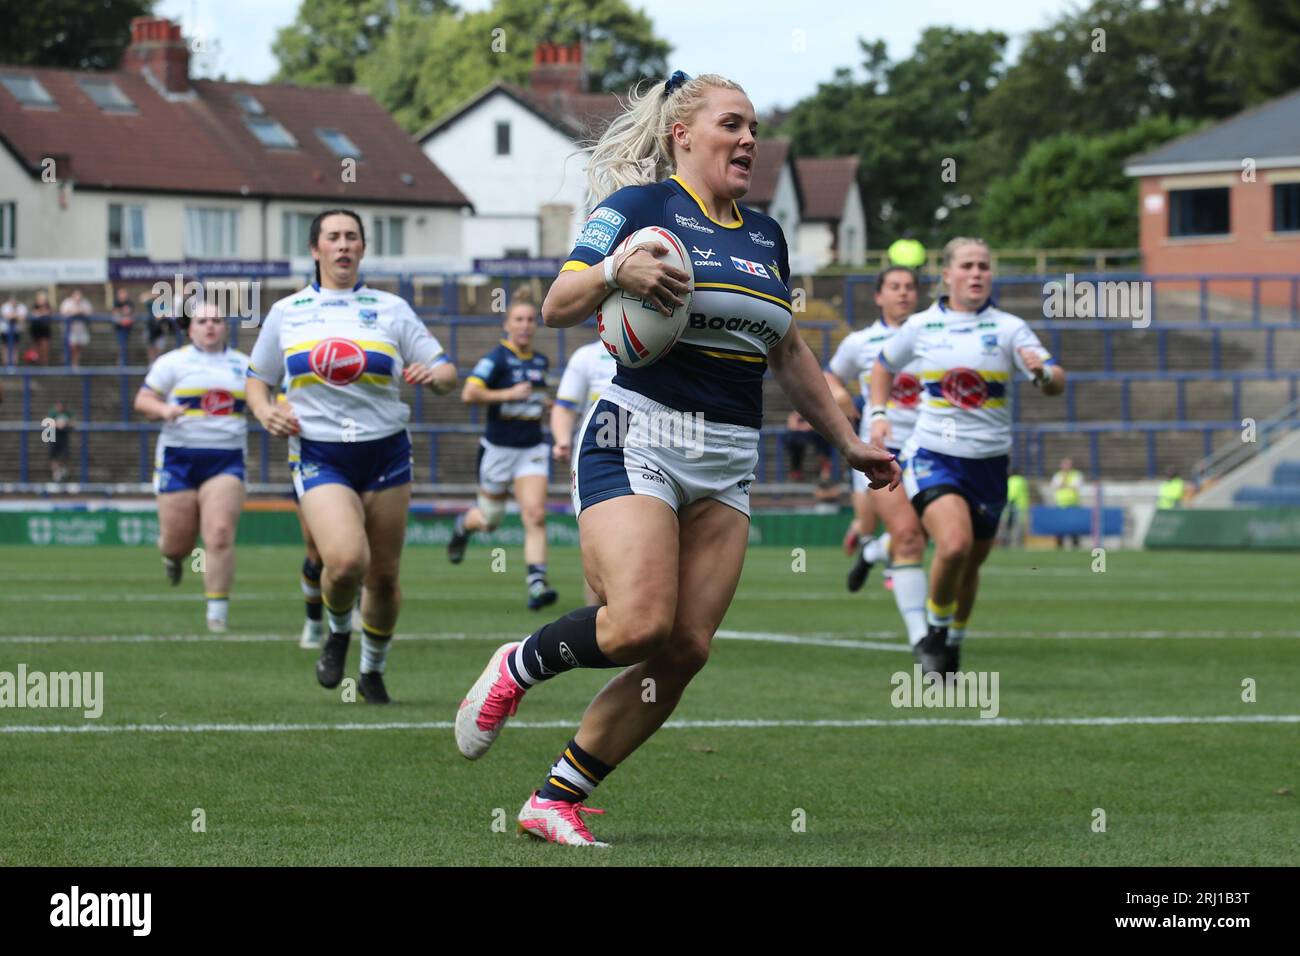 Leeds, UK. 20th Aug, 2023. Headingley Stadium, Leeds, West Yorkshire, 20th August 2023 Betfred Womens Super League Leeds Rhinos v Warrington Wolves Amy Hardcastle of Leeds Rhinos Women on her way to scoring the 1st try of the game against Warrington Wolves Women Credit: Touchlinepics/Alamy Live News Stock Photo